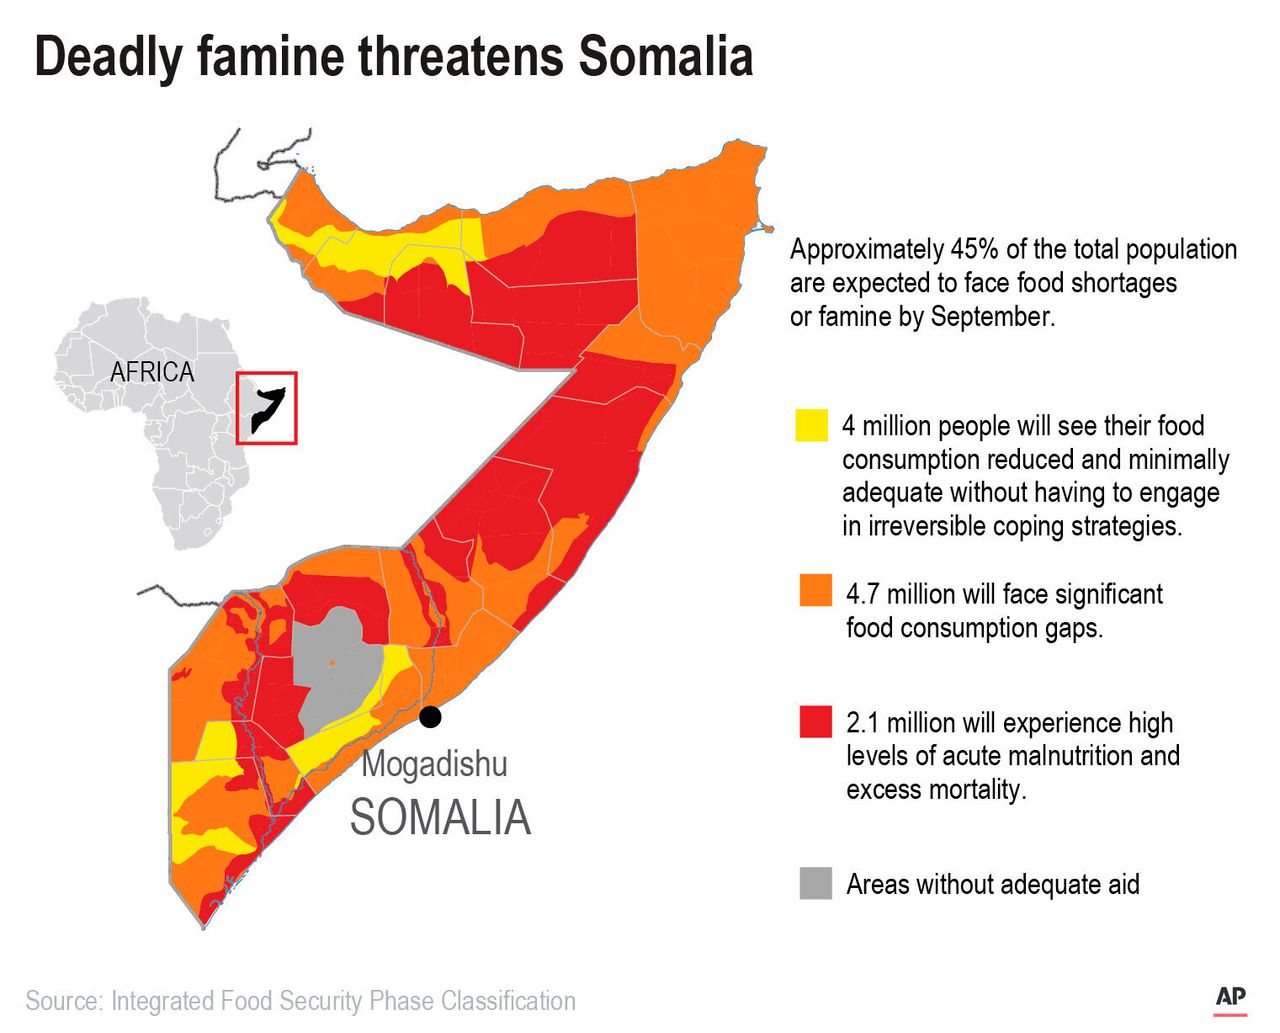 Approximately 45% of the total population are expected to face food shortages or famine by September.